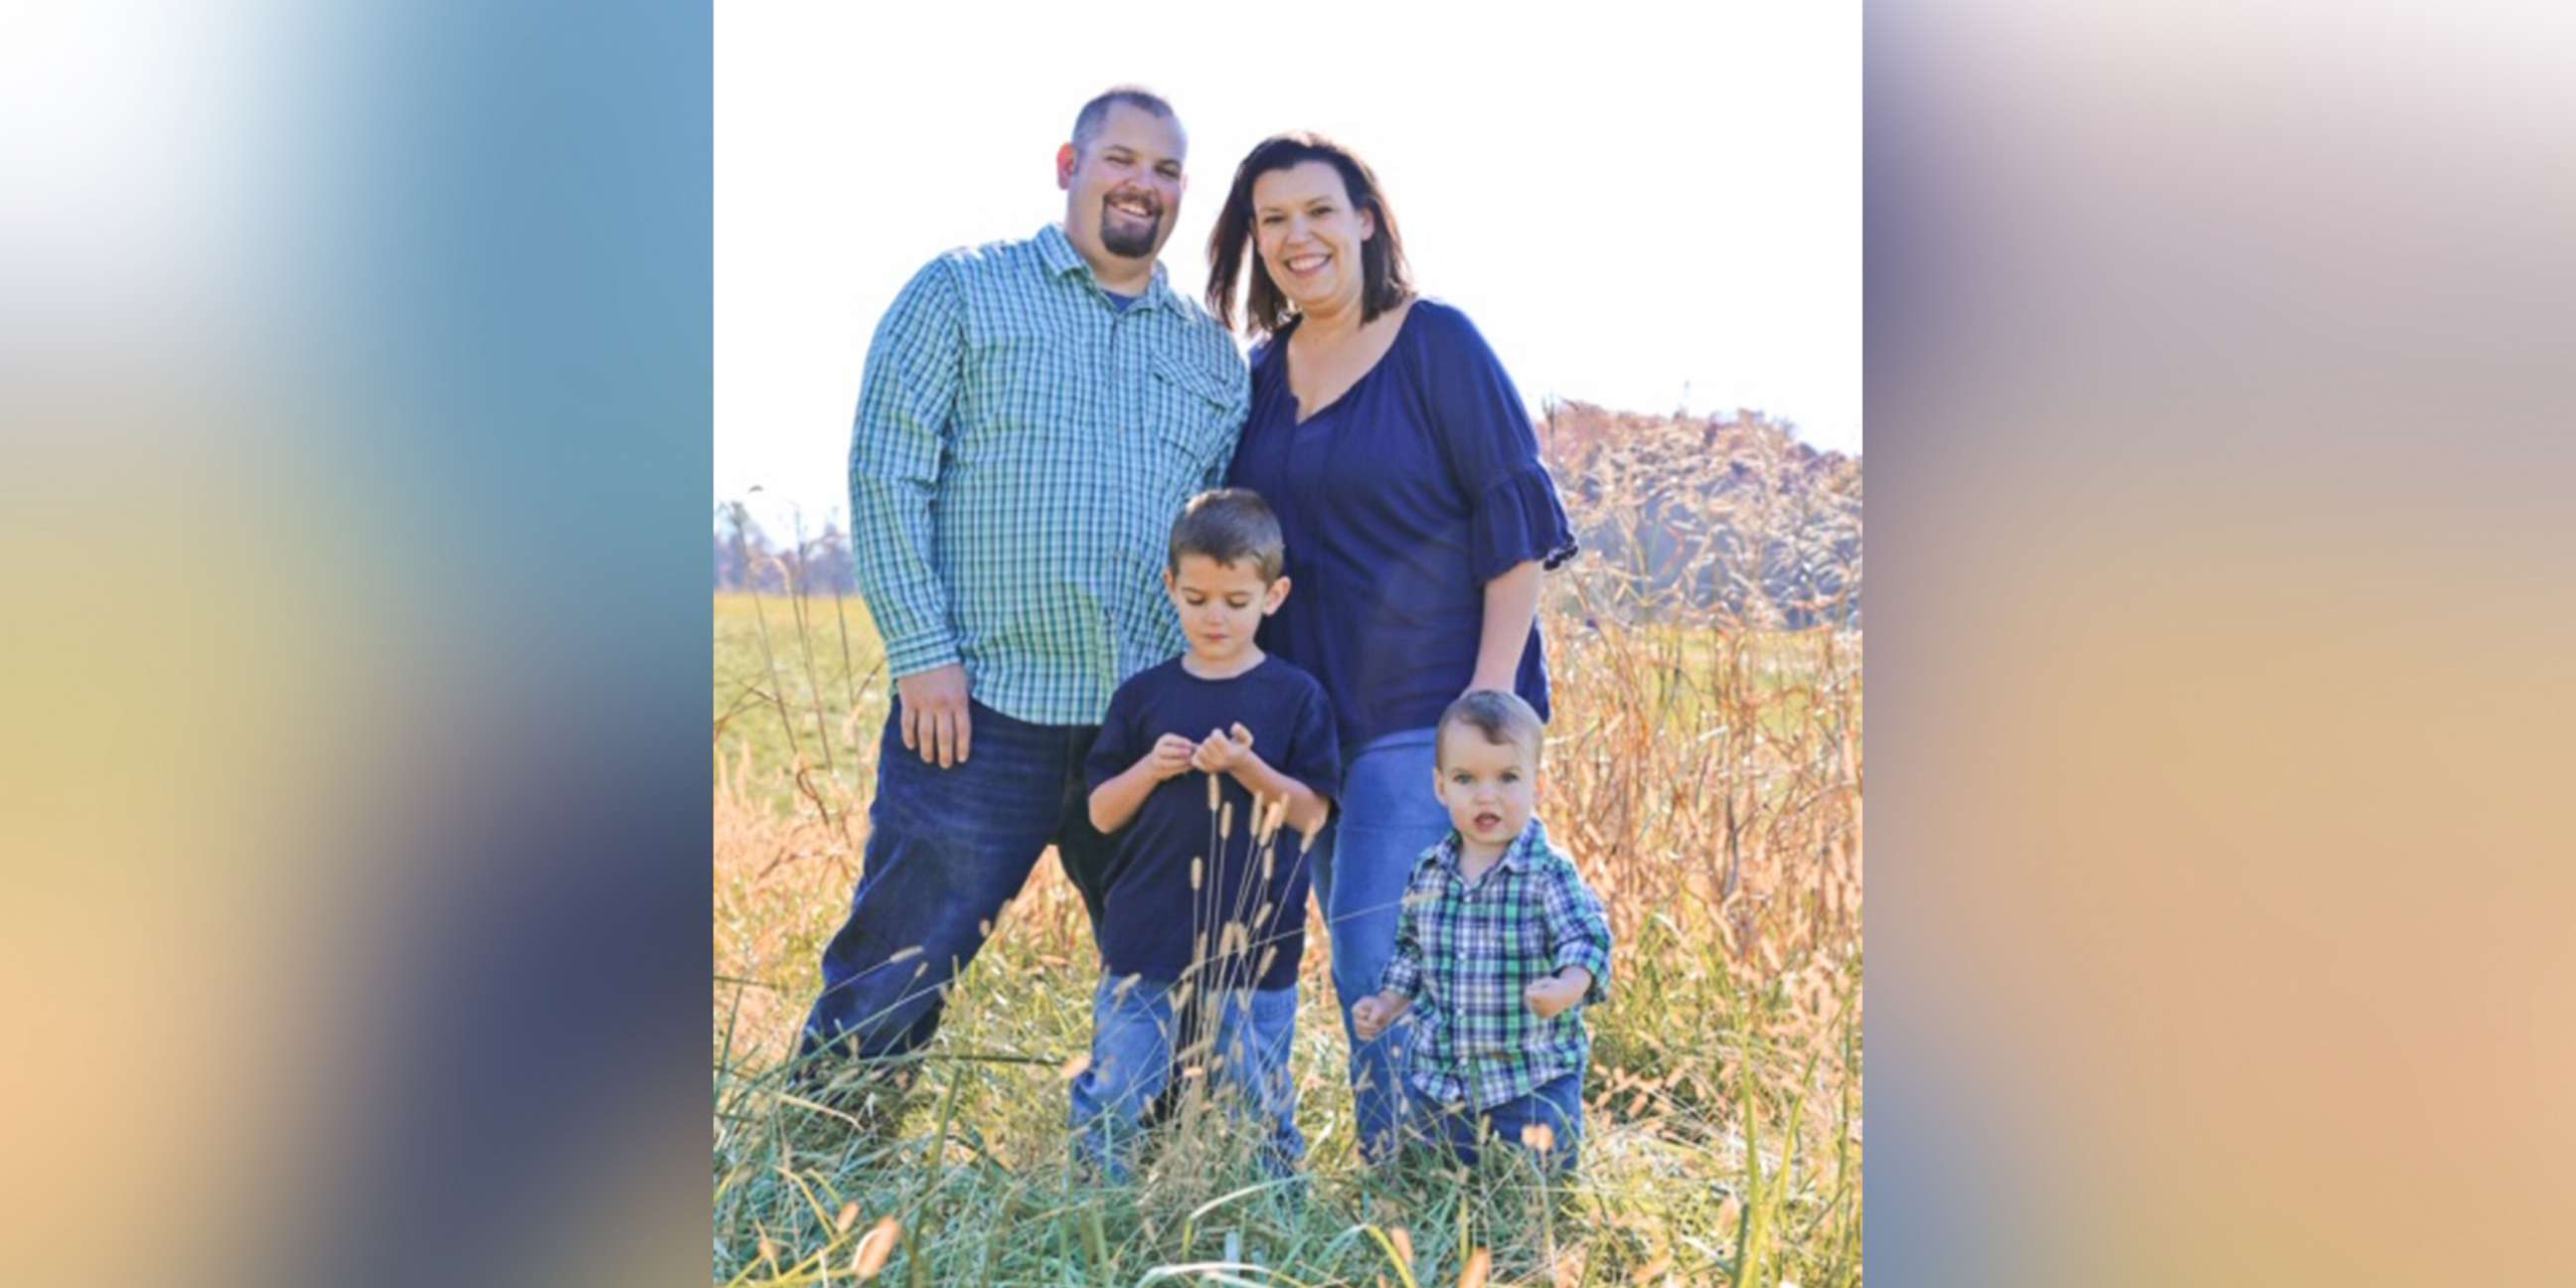 PHOTO: Becky and Jim Sykes of West Virginia and their two sons, 5-year-old Nate and nearly 2-year-old Anthony, are pictured in an undated handout photo.